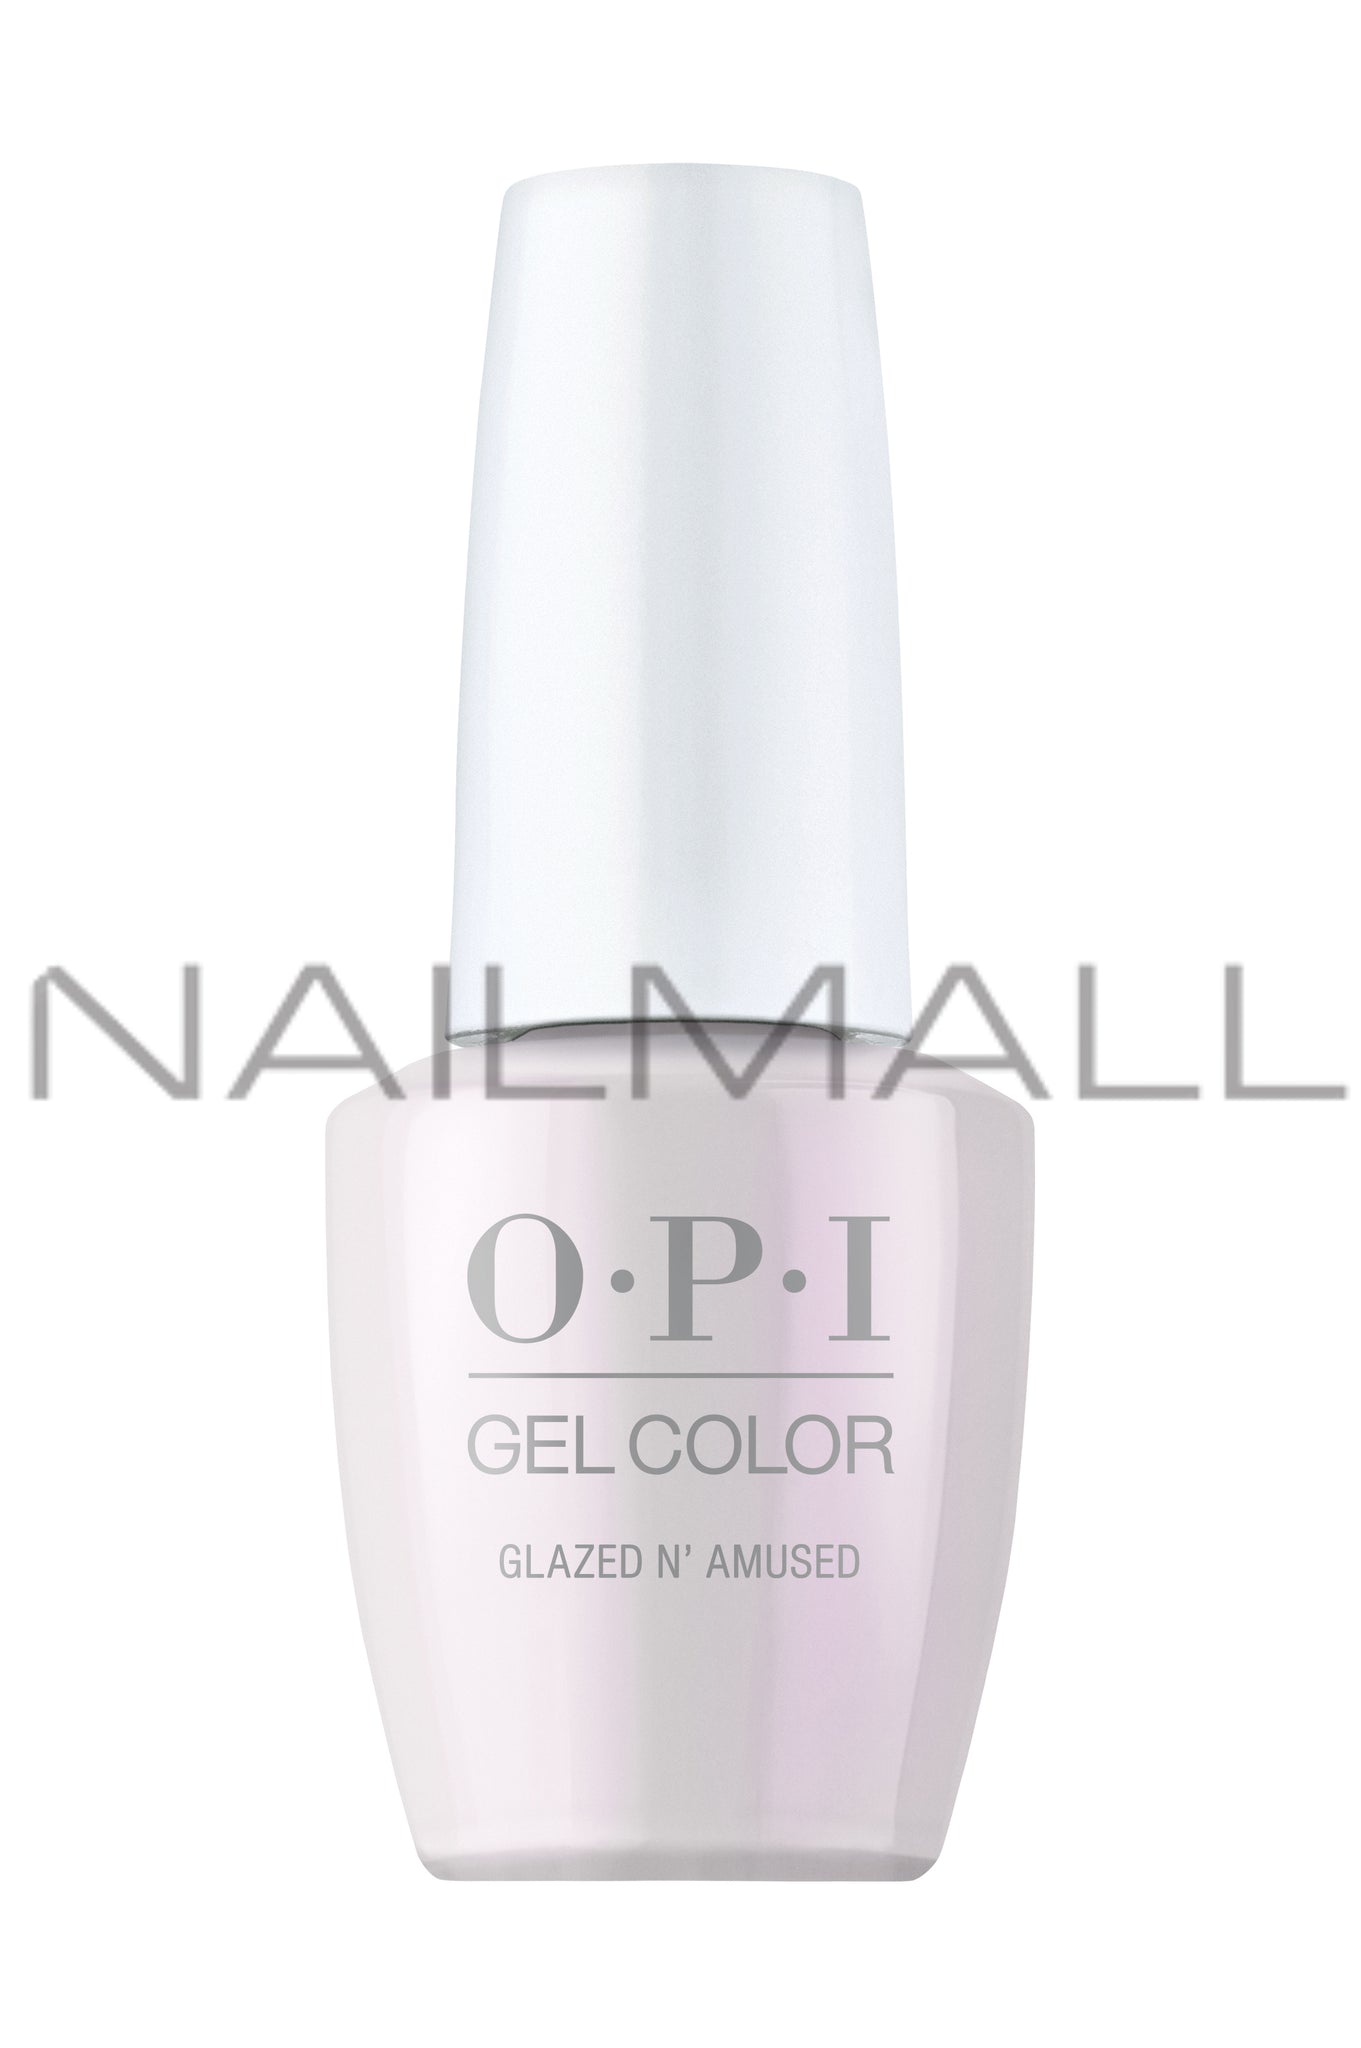 OPI Matching Gelcolor and Nail Polish - S013 	Glazed 'n Amused